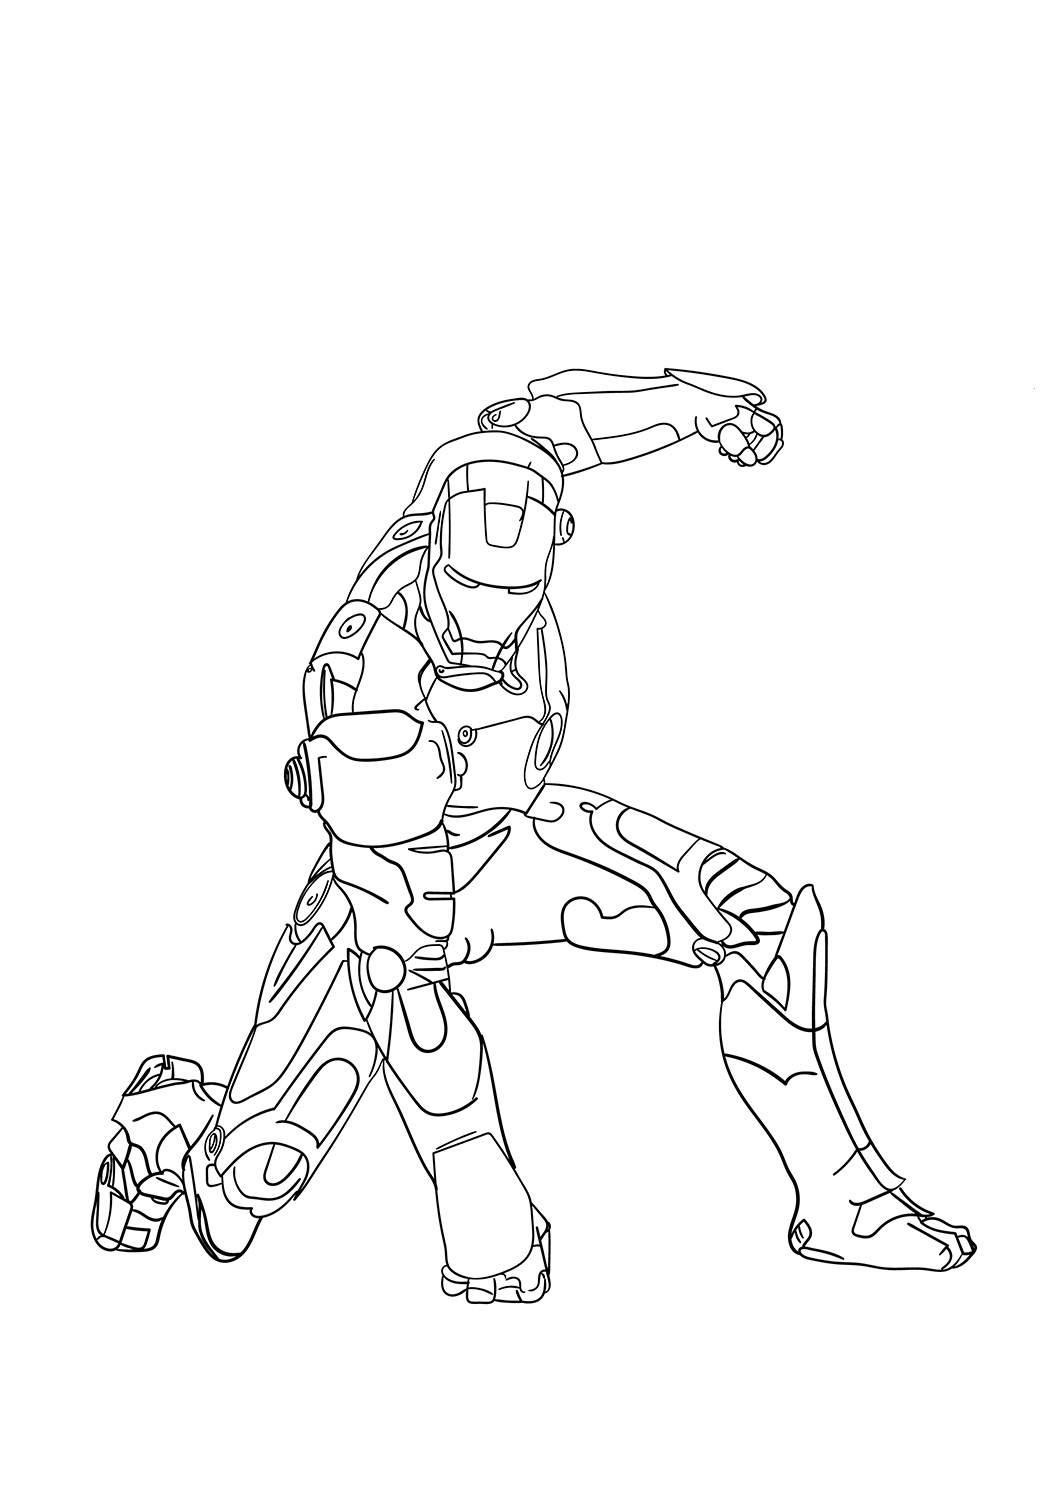 Download Strong Iron Man Coloring Page - Free Printable Coloring Pages for Kids